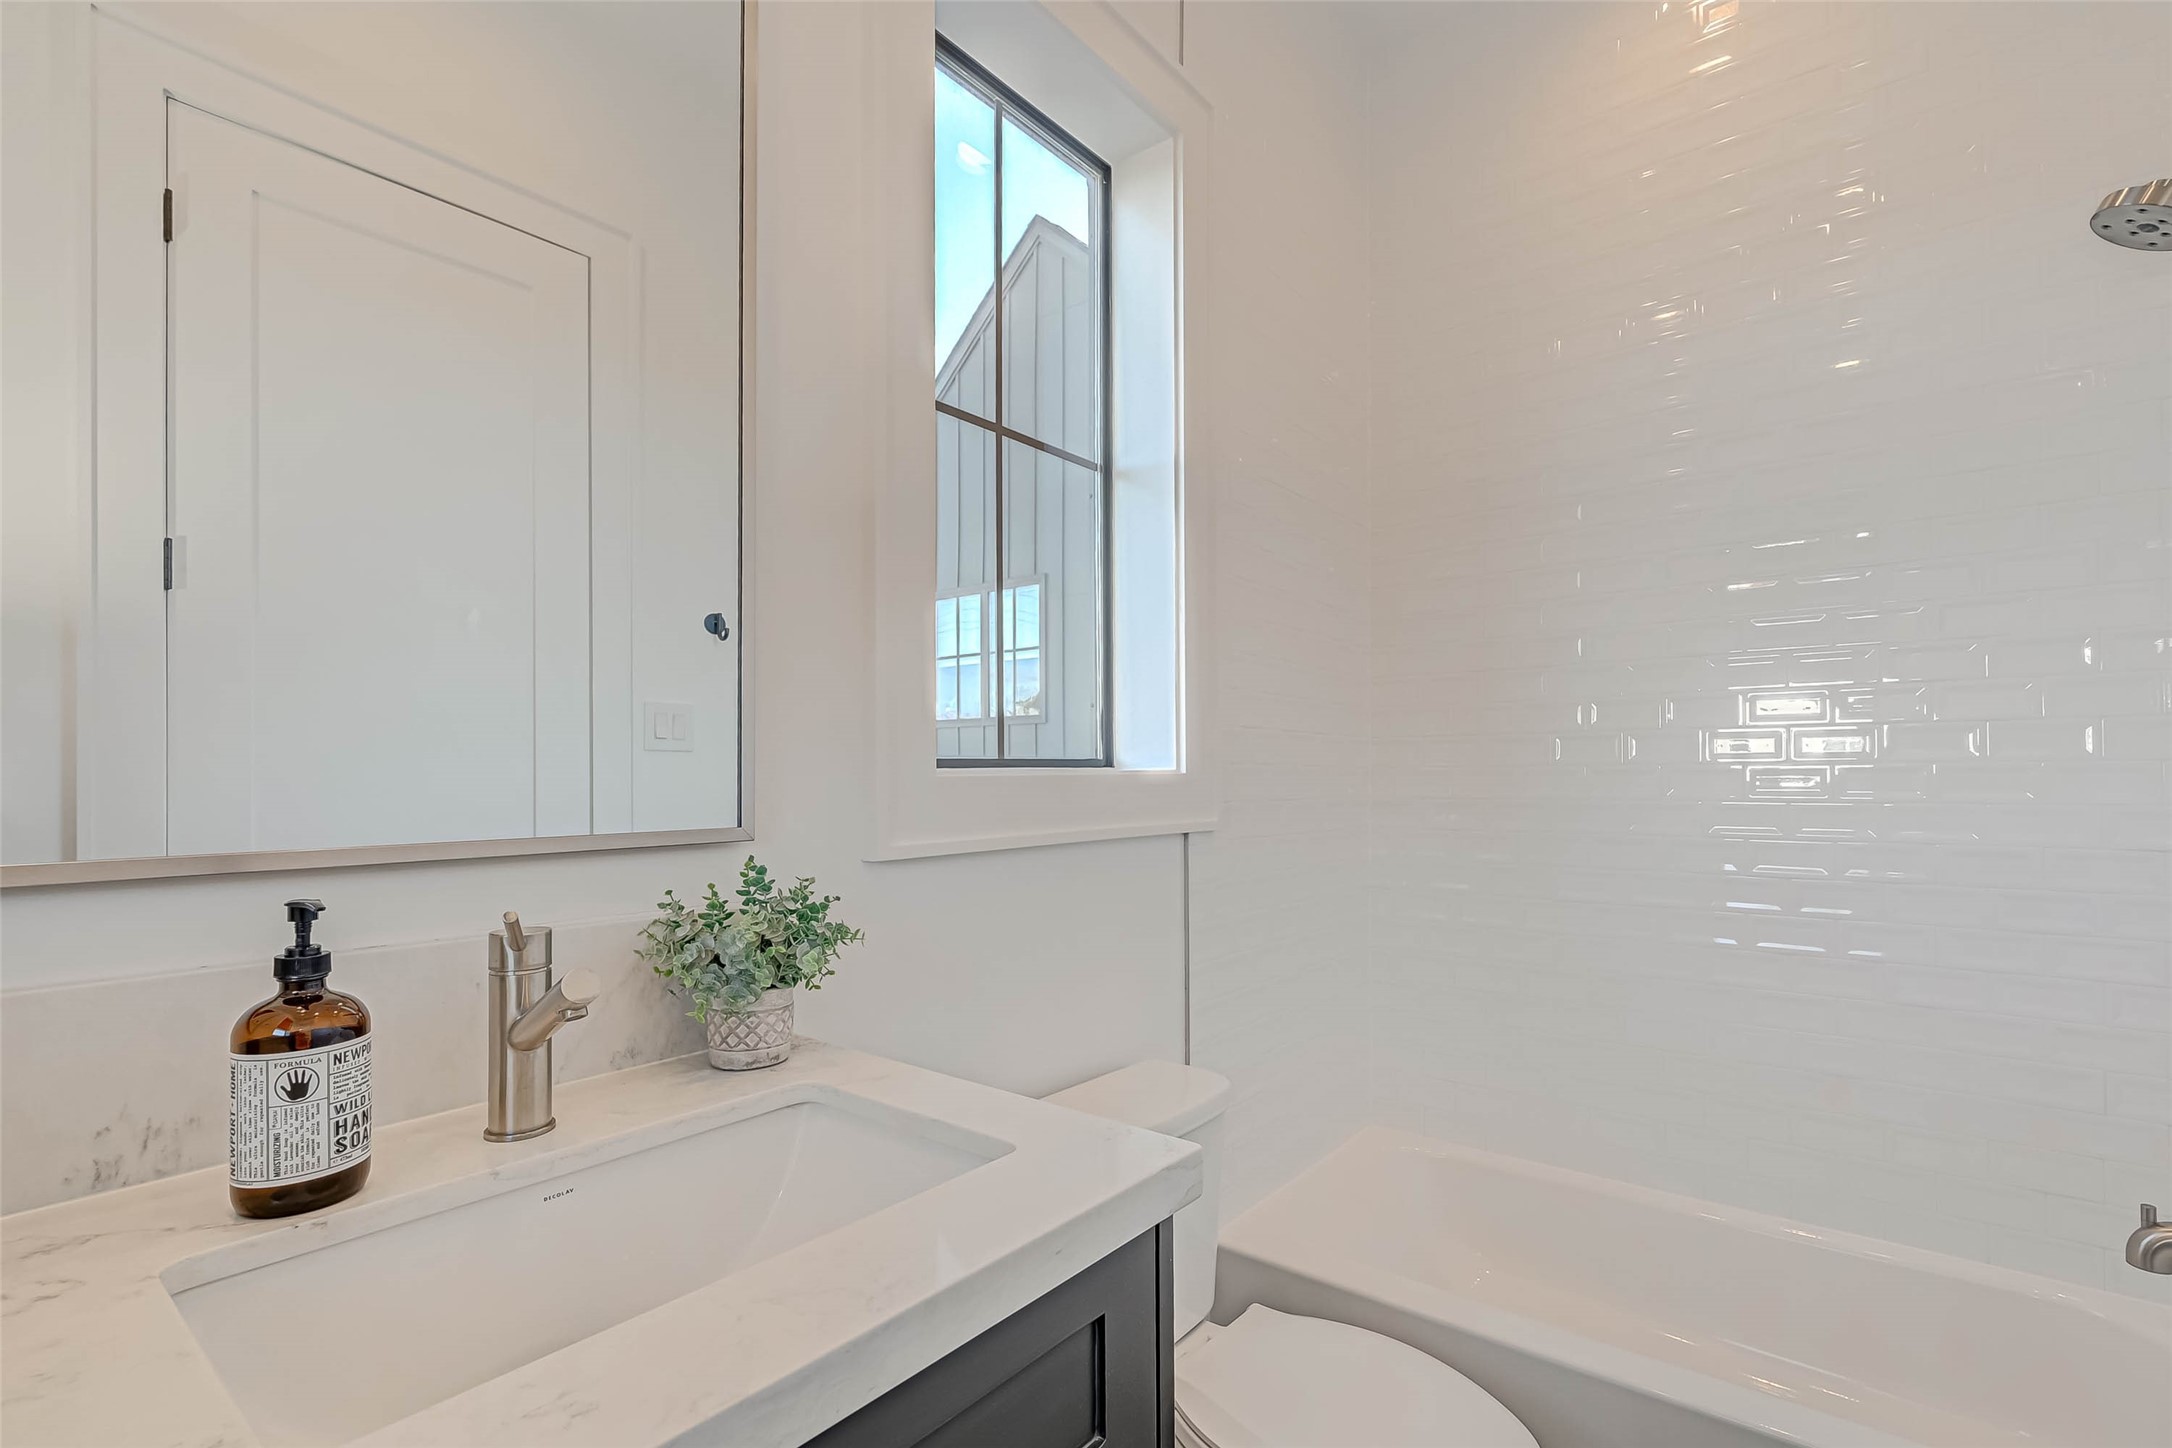 A full bath on the second floor features a fully-tiled tub and shower combination.